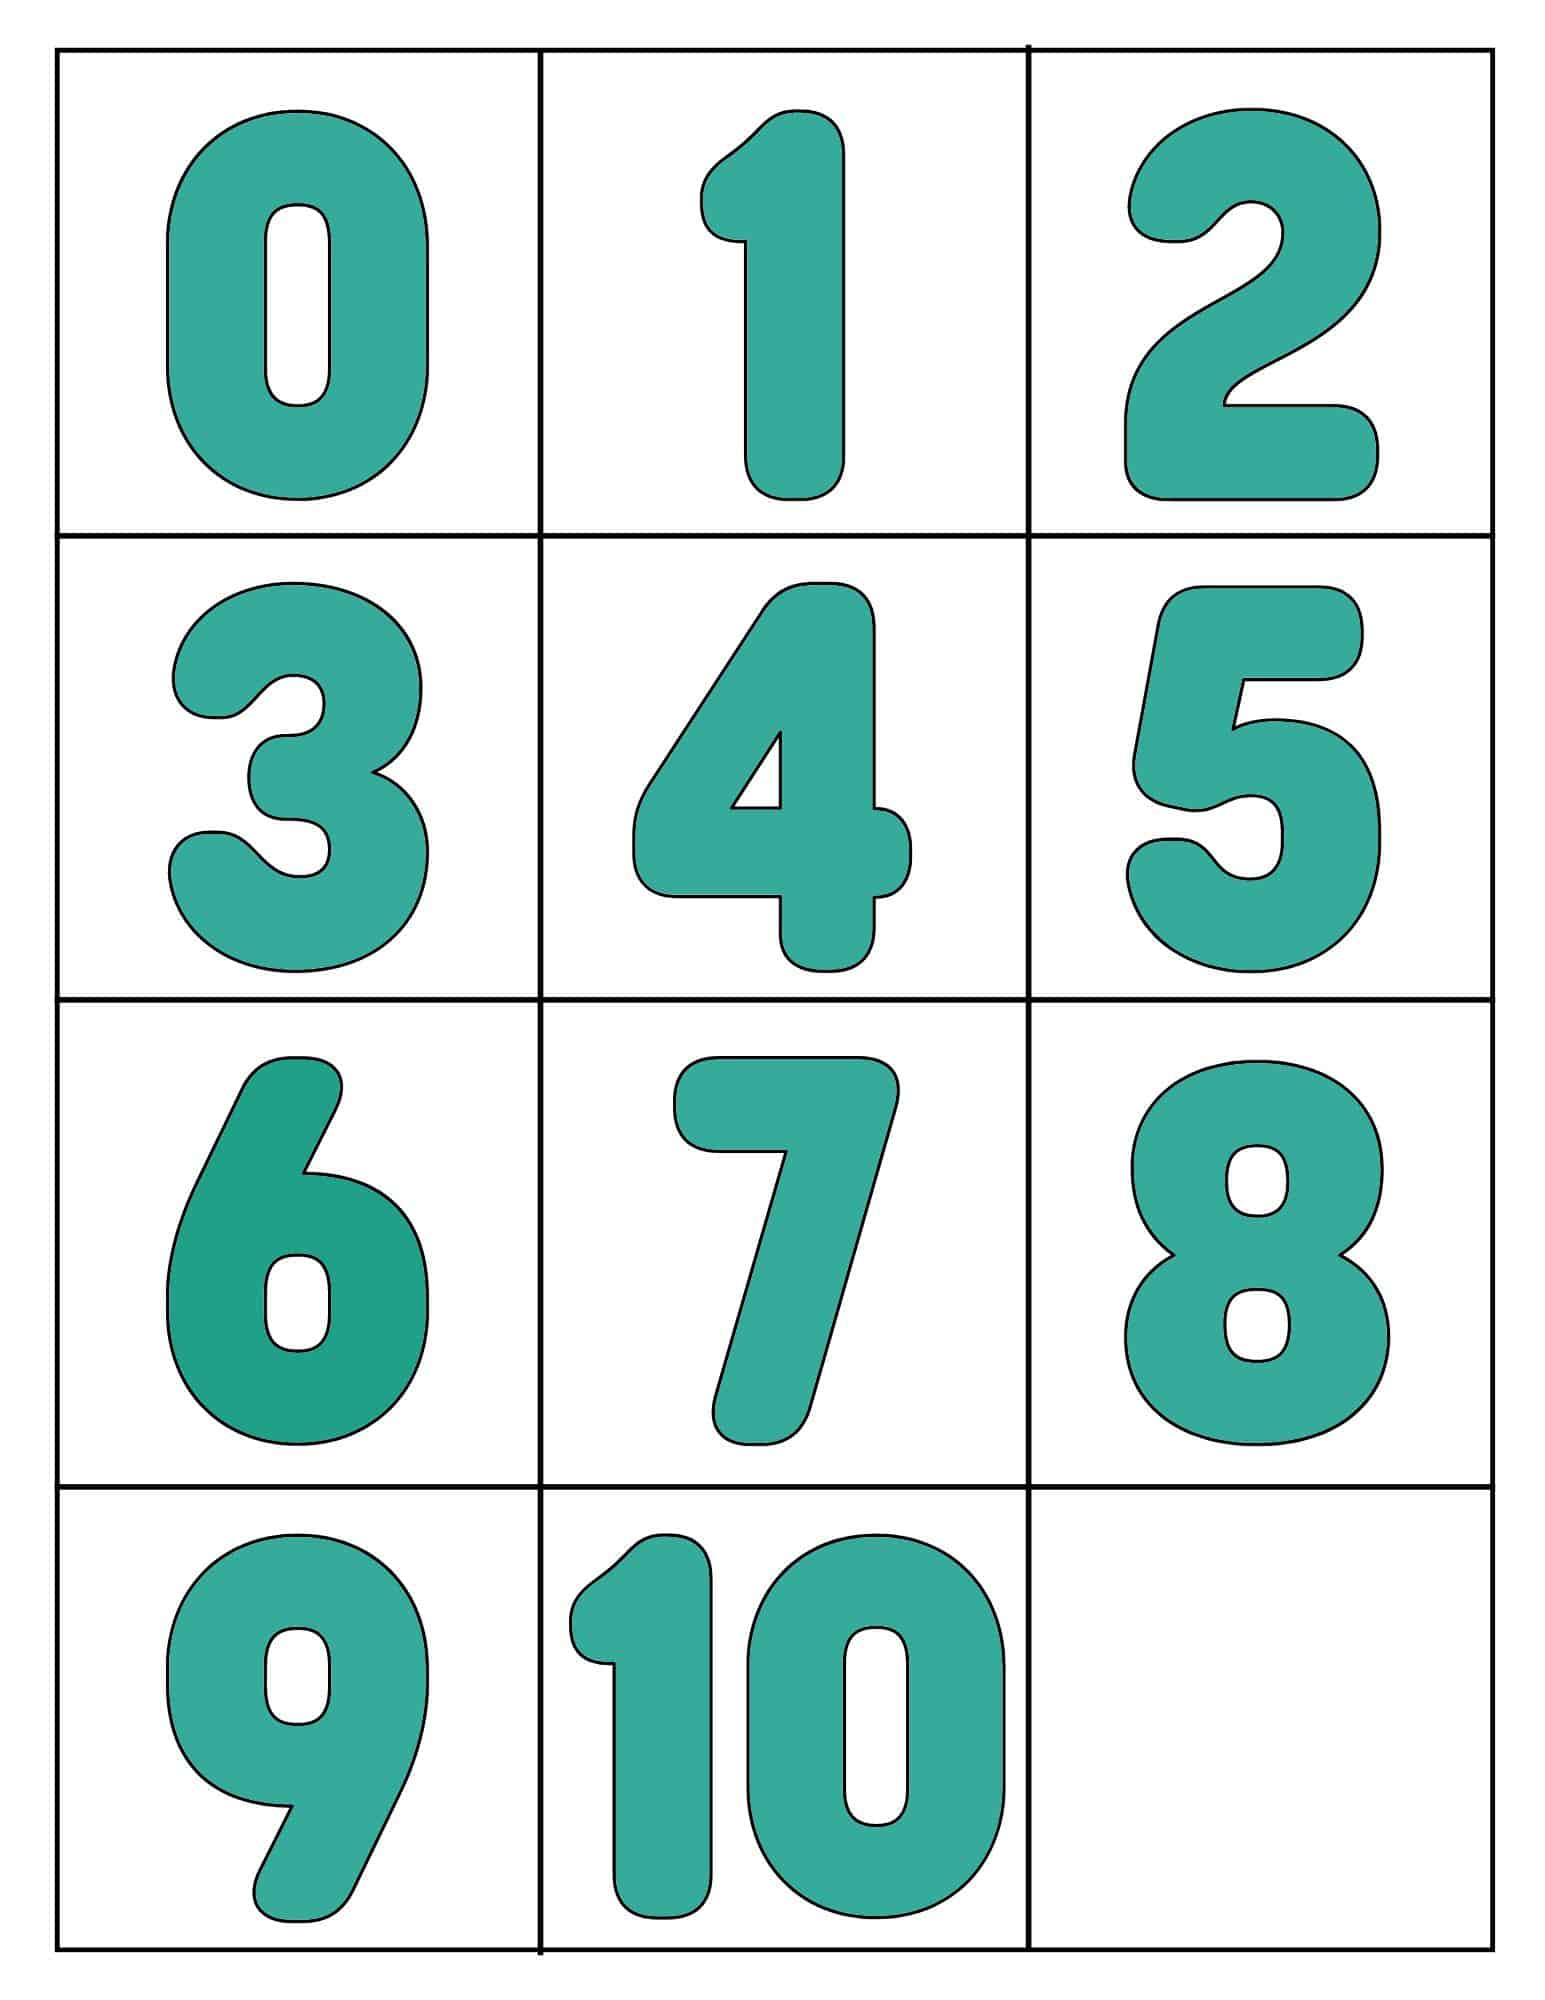 0-10 Printable Numbers (Free Templates In All Sizes) - Free Printable Number Stencils 1-20